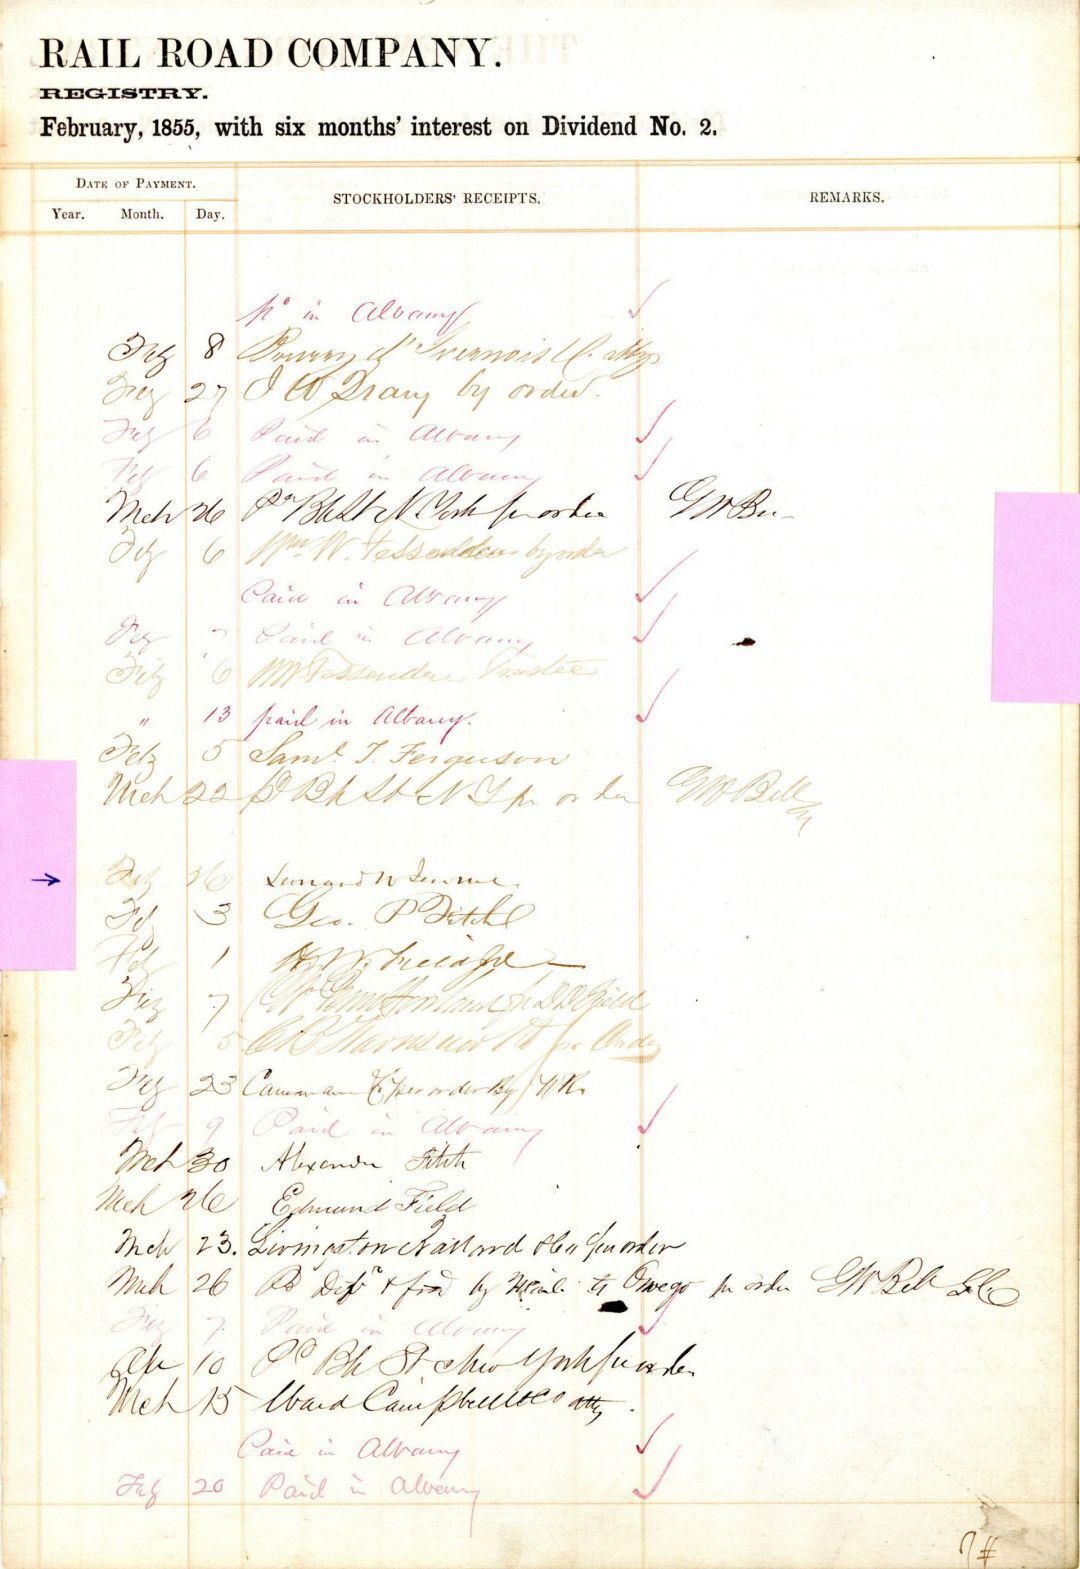 New York Central Ledger Sheet signed by Leonard W. Jerome and William Fessenden 